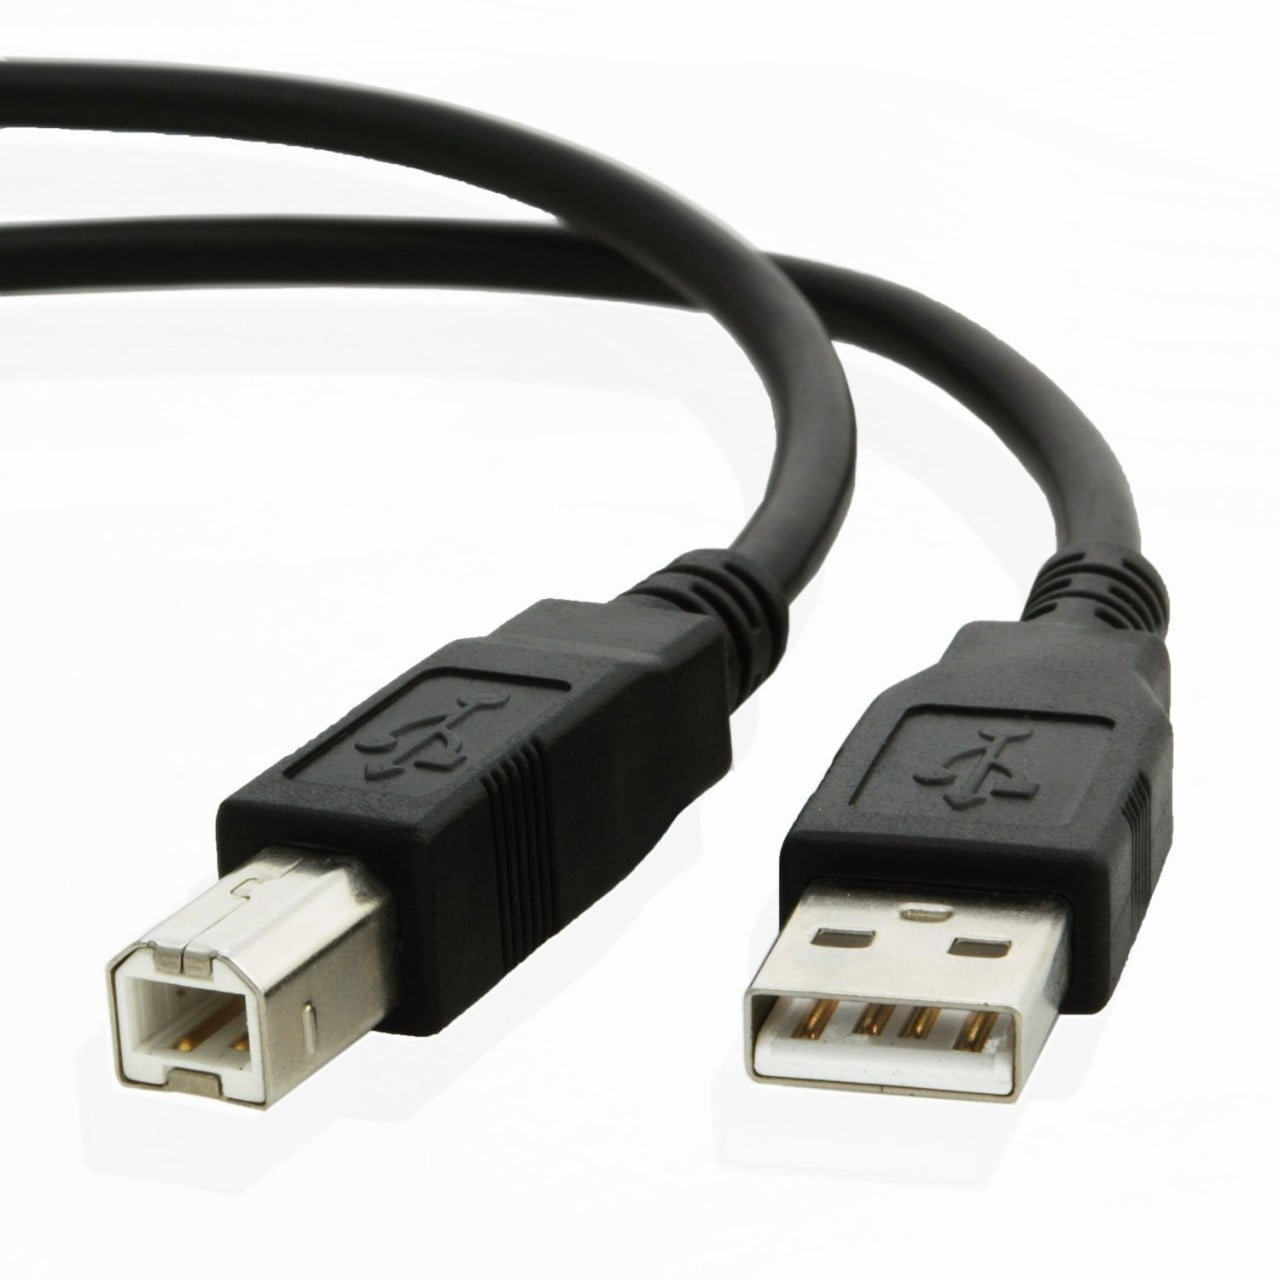 OMNIHIL 8 Feet Long High Speed USB 2.0 Cable Compatible with HP PHOTOSMART C6280 